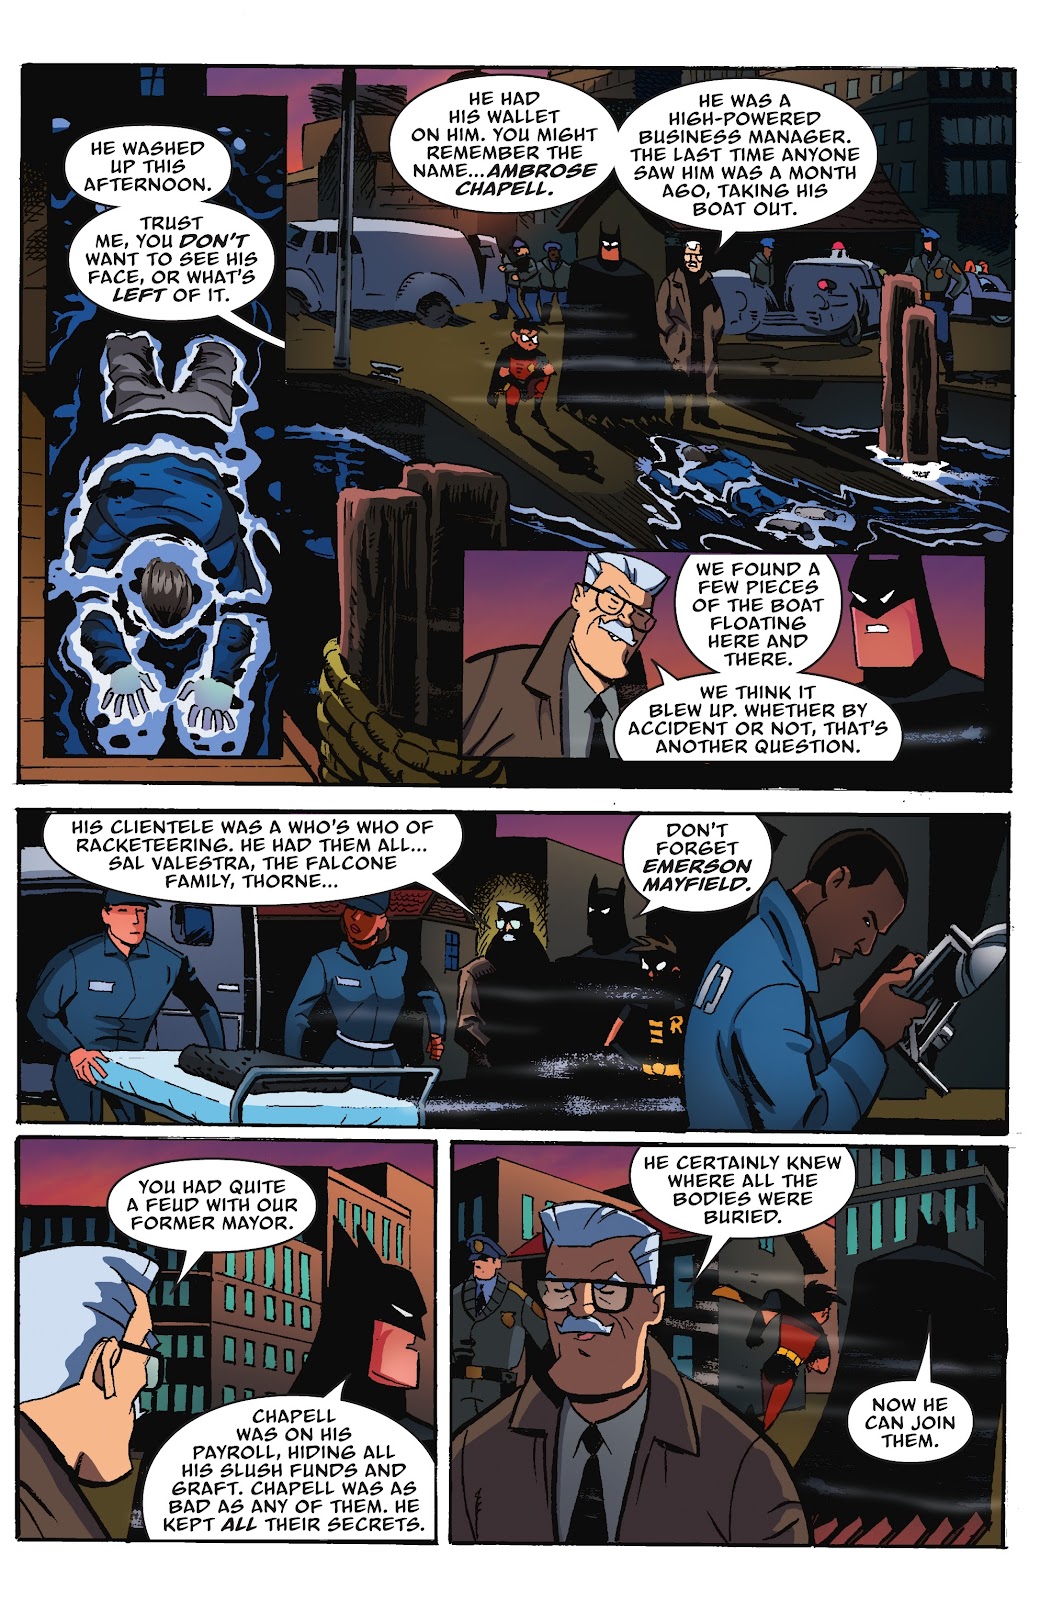 Batman: The Adventures Continue: Season Two issue 5 - Page 3